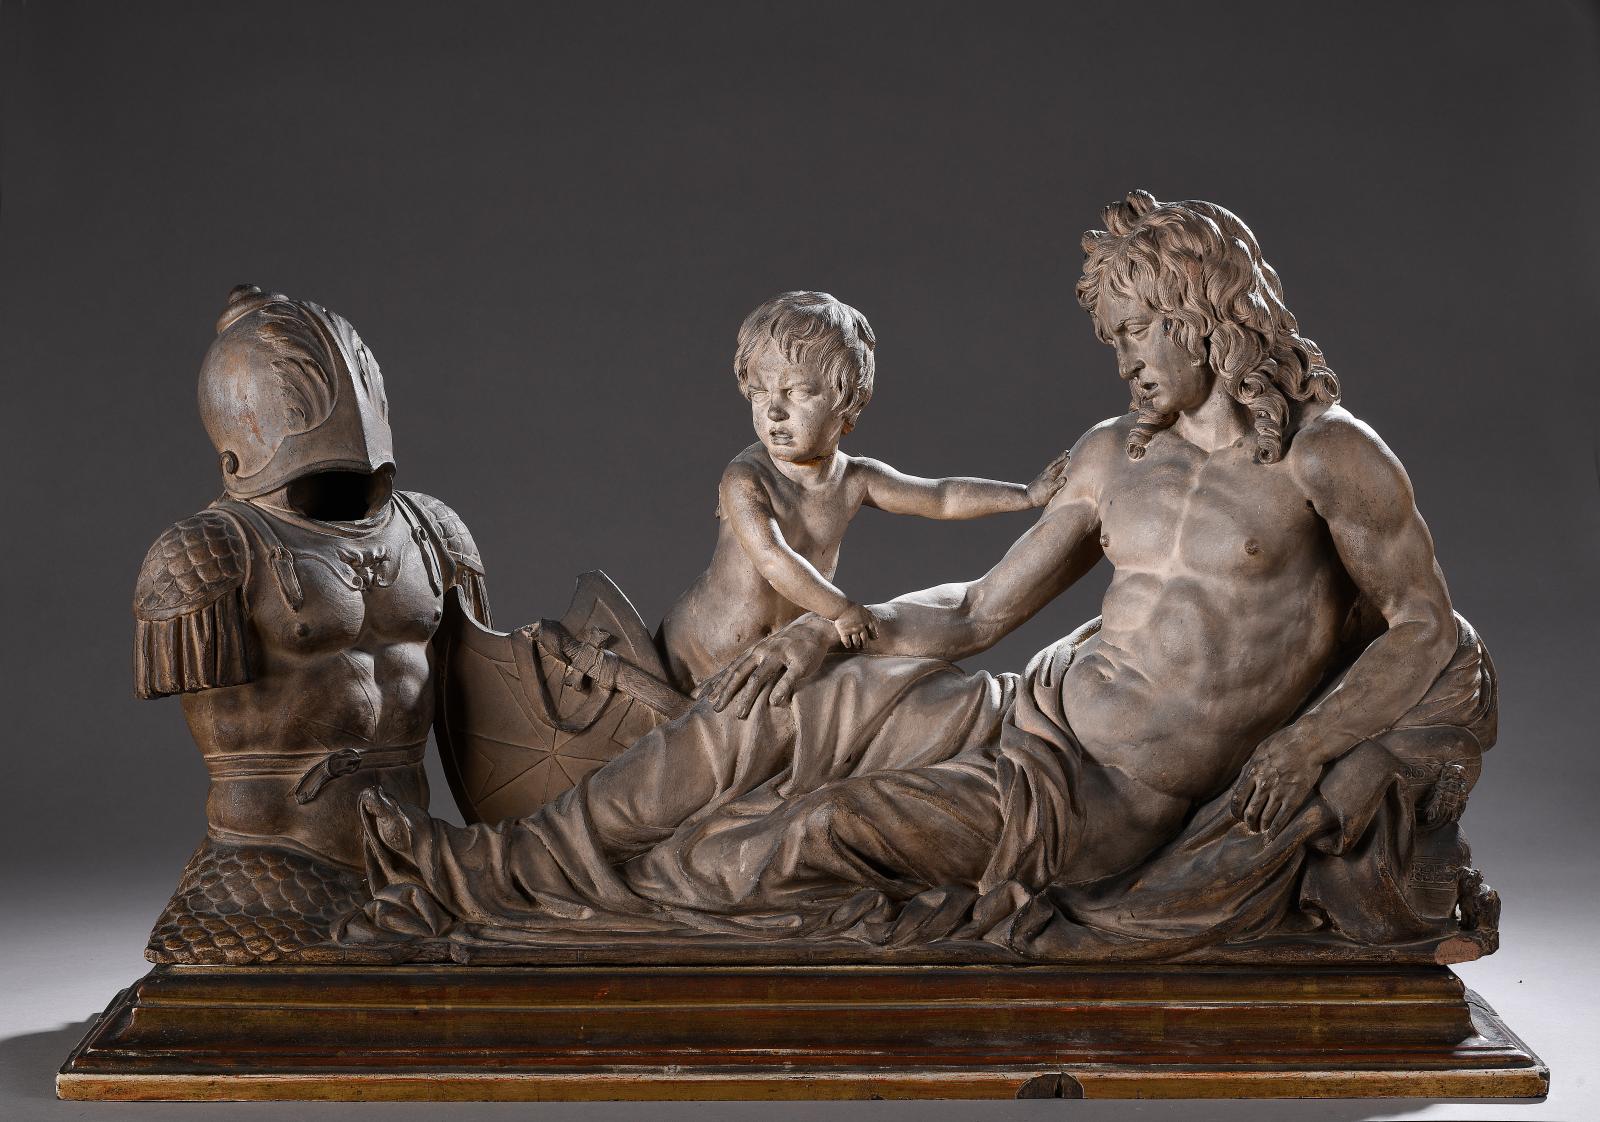 A Rediscovered Masterpiece by Sculptor François Anguier